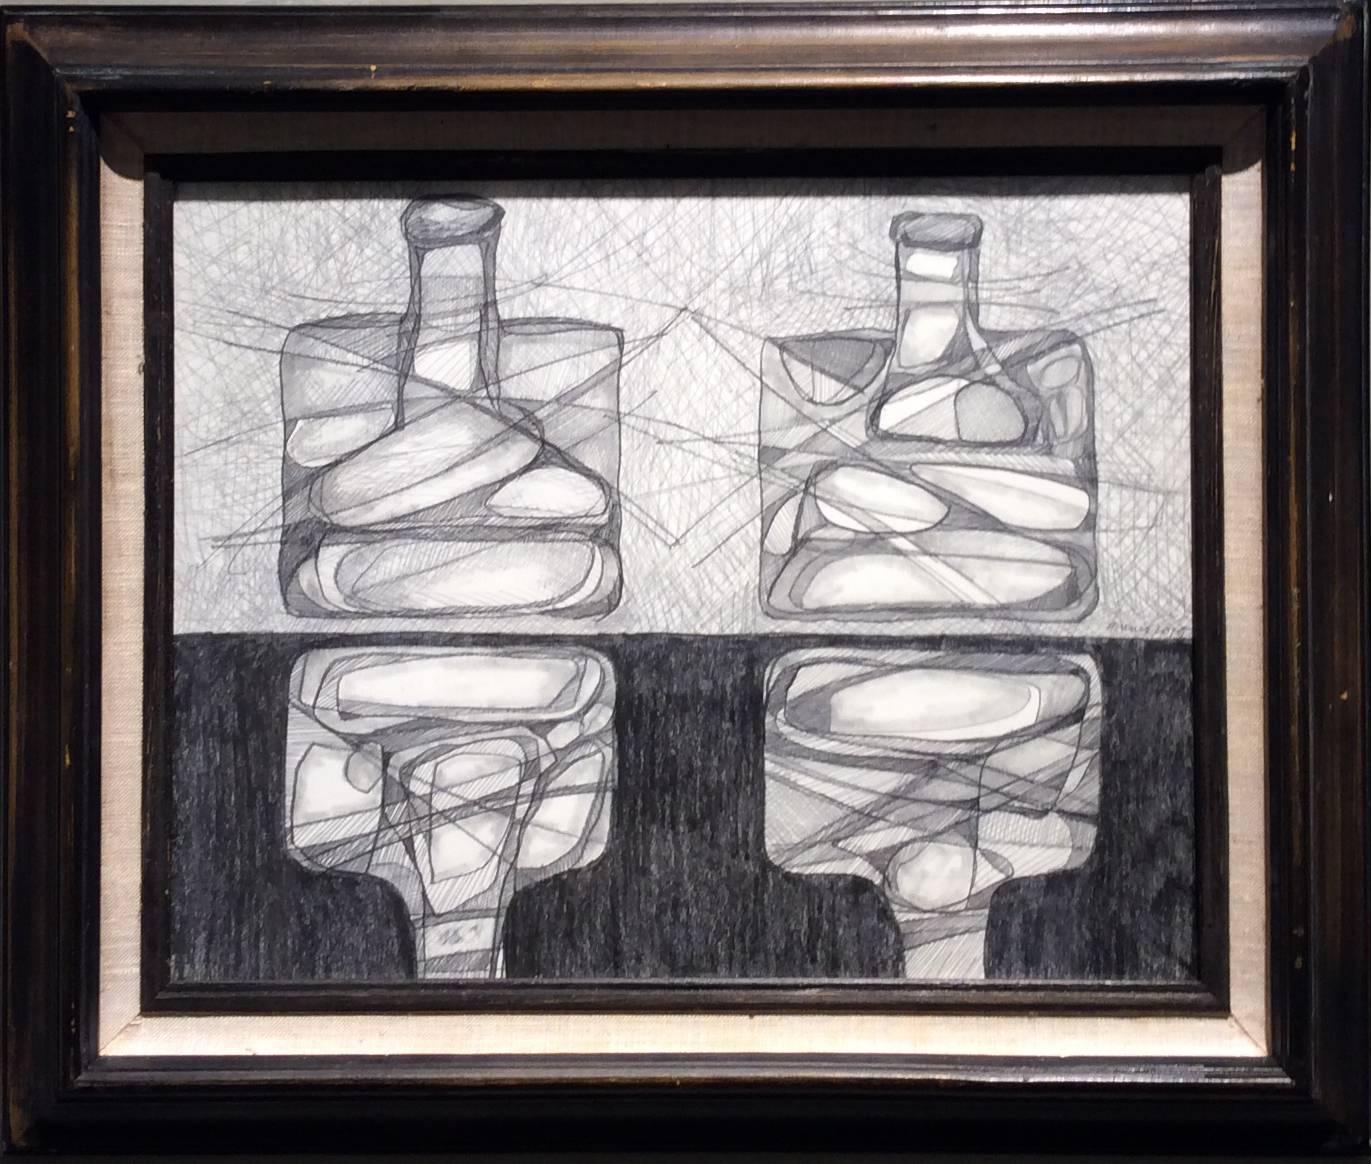 David Dew Bruner Abstract Drawing - Two Morandi Bottles: Abstract Cubist Style, Modern Drawing in Vintage Wood Frame